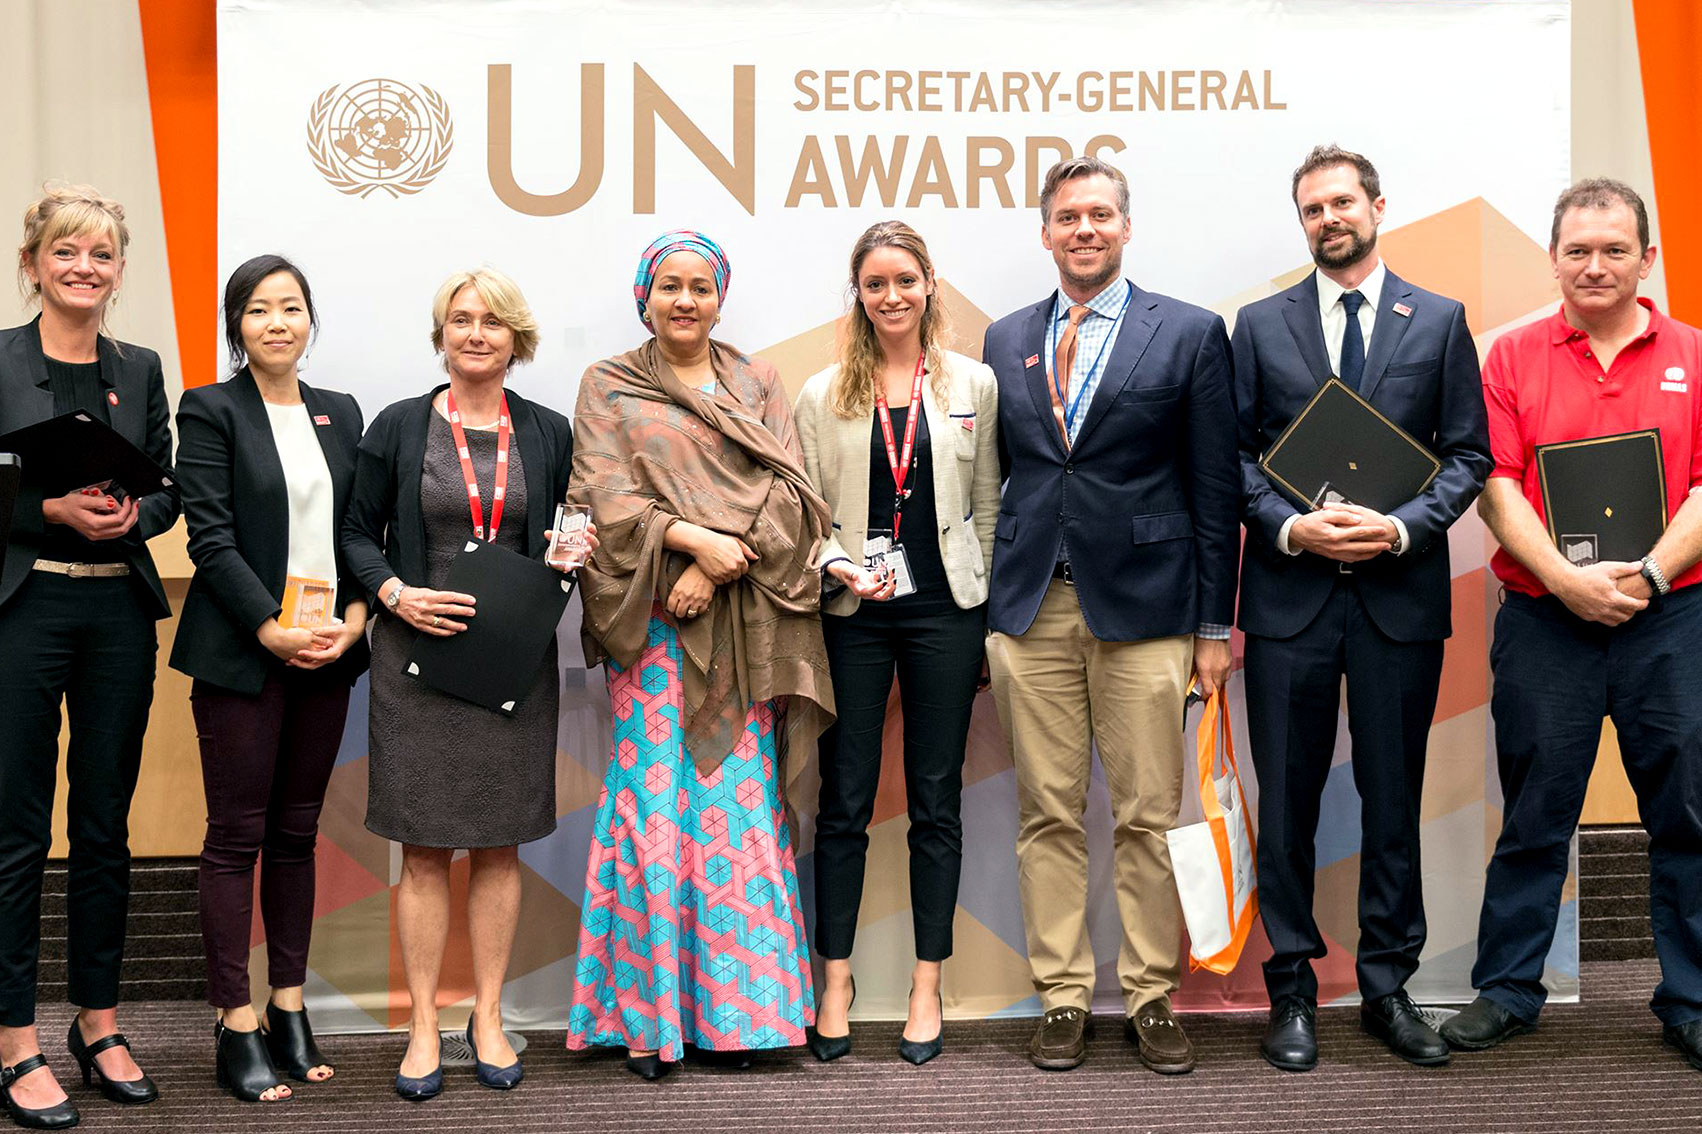 UNMAS team pose with the Deputy-Secretary-General as they receive an award for innovation.